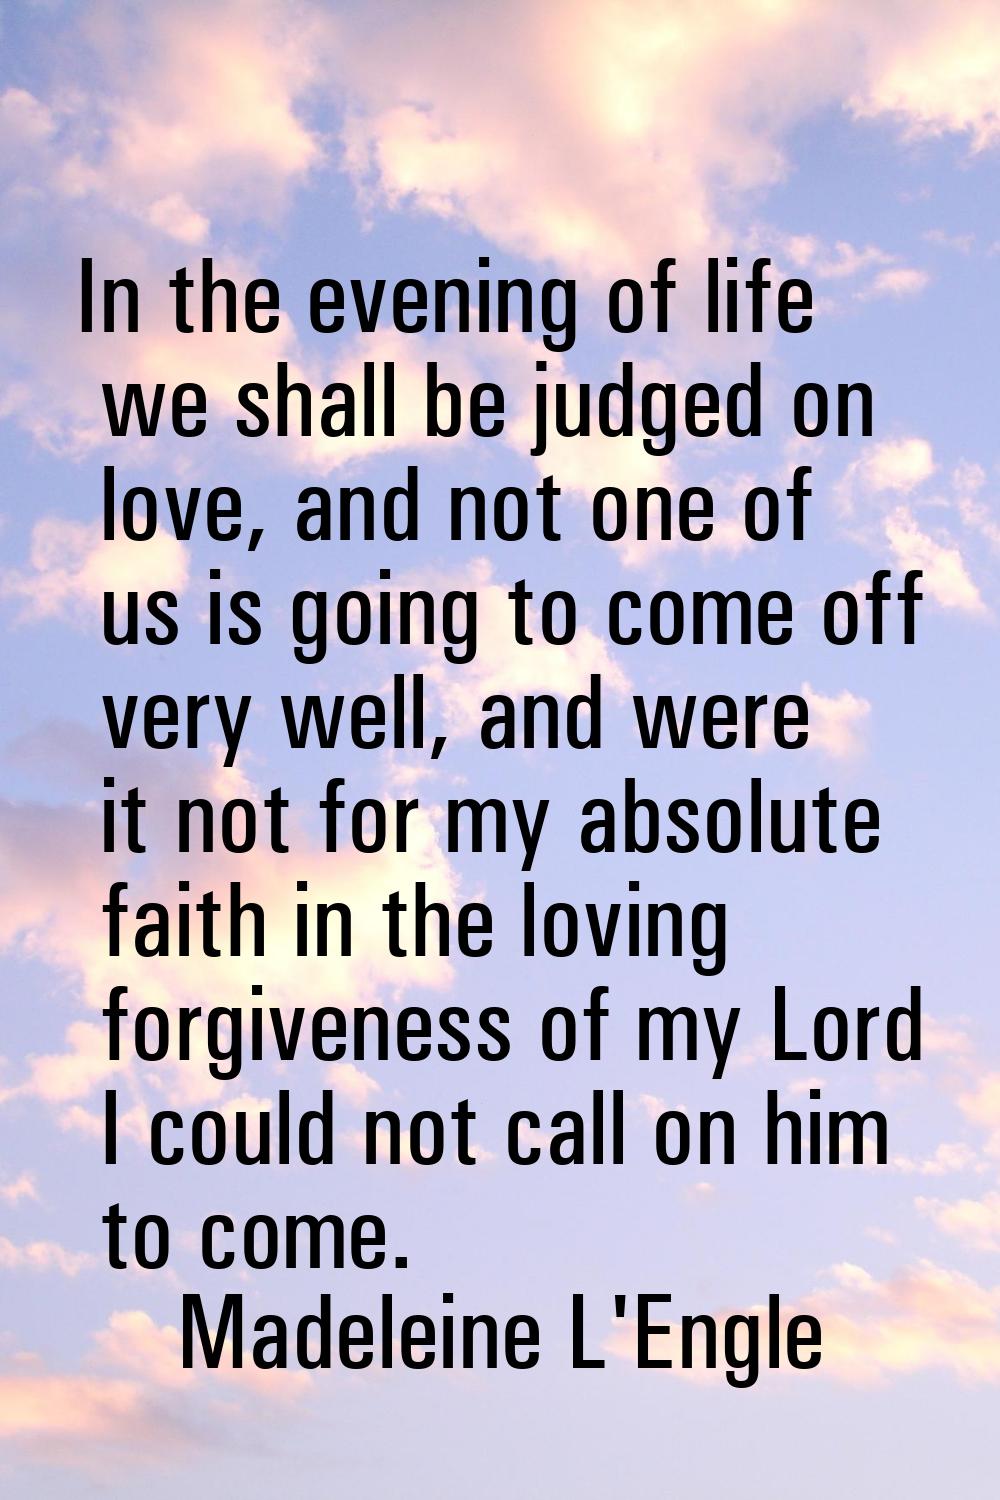 In the evening of life we shall be judged on love, and not one of us is going to come off very well